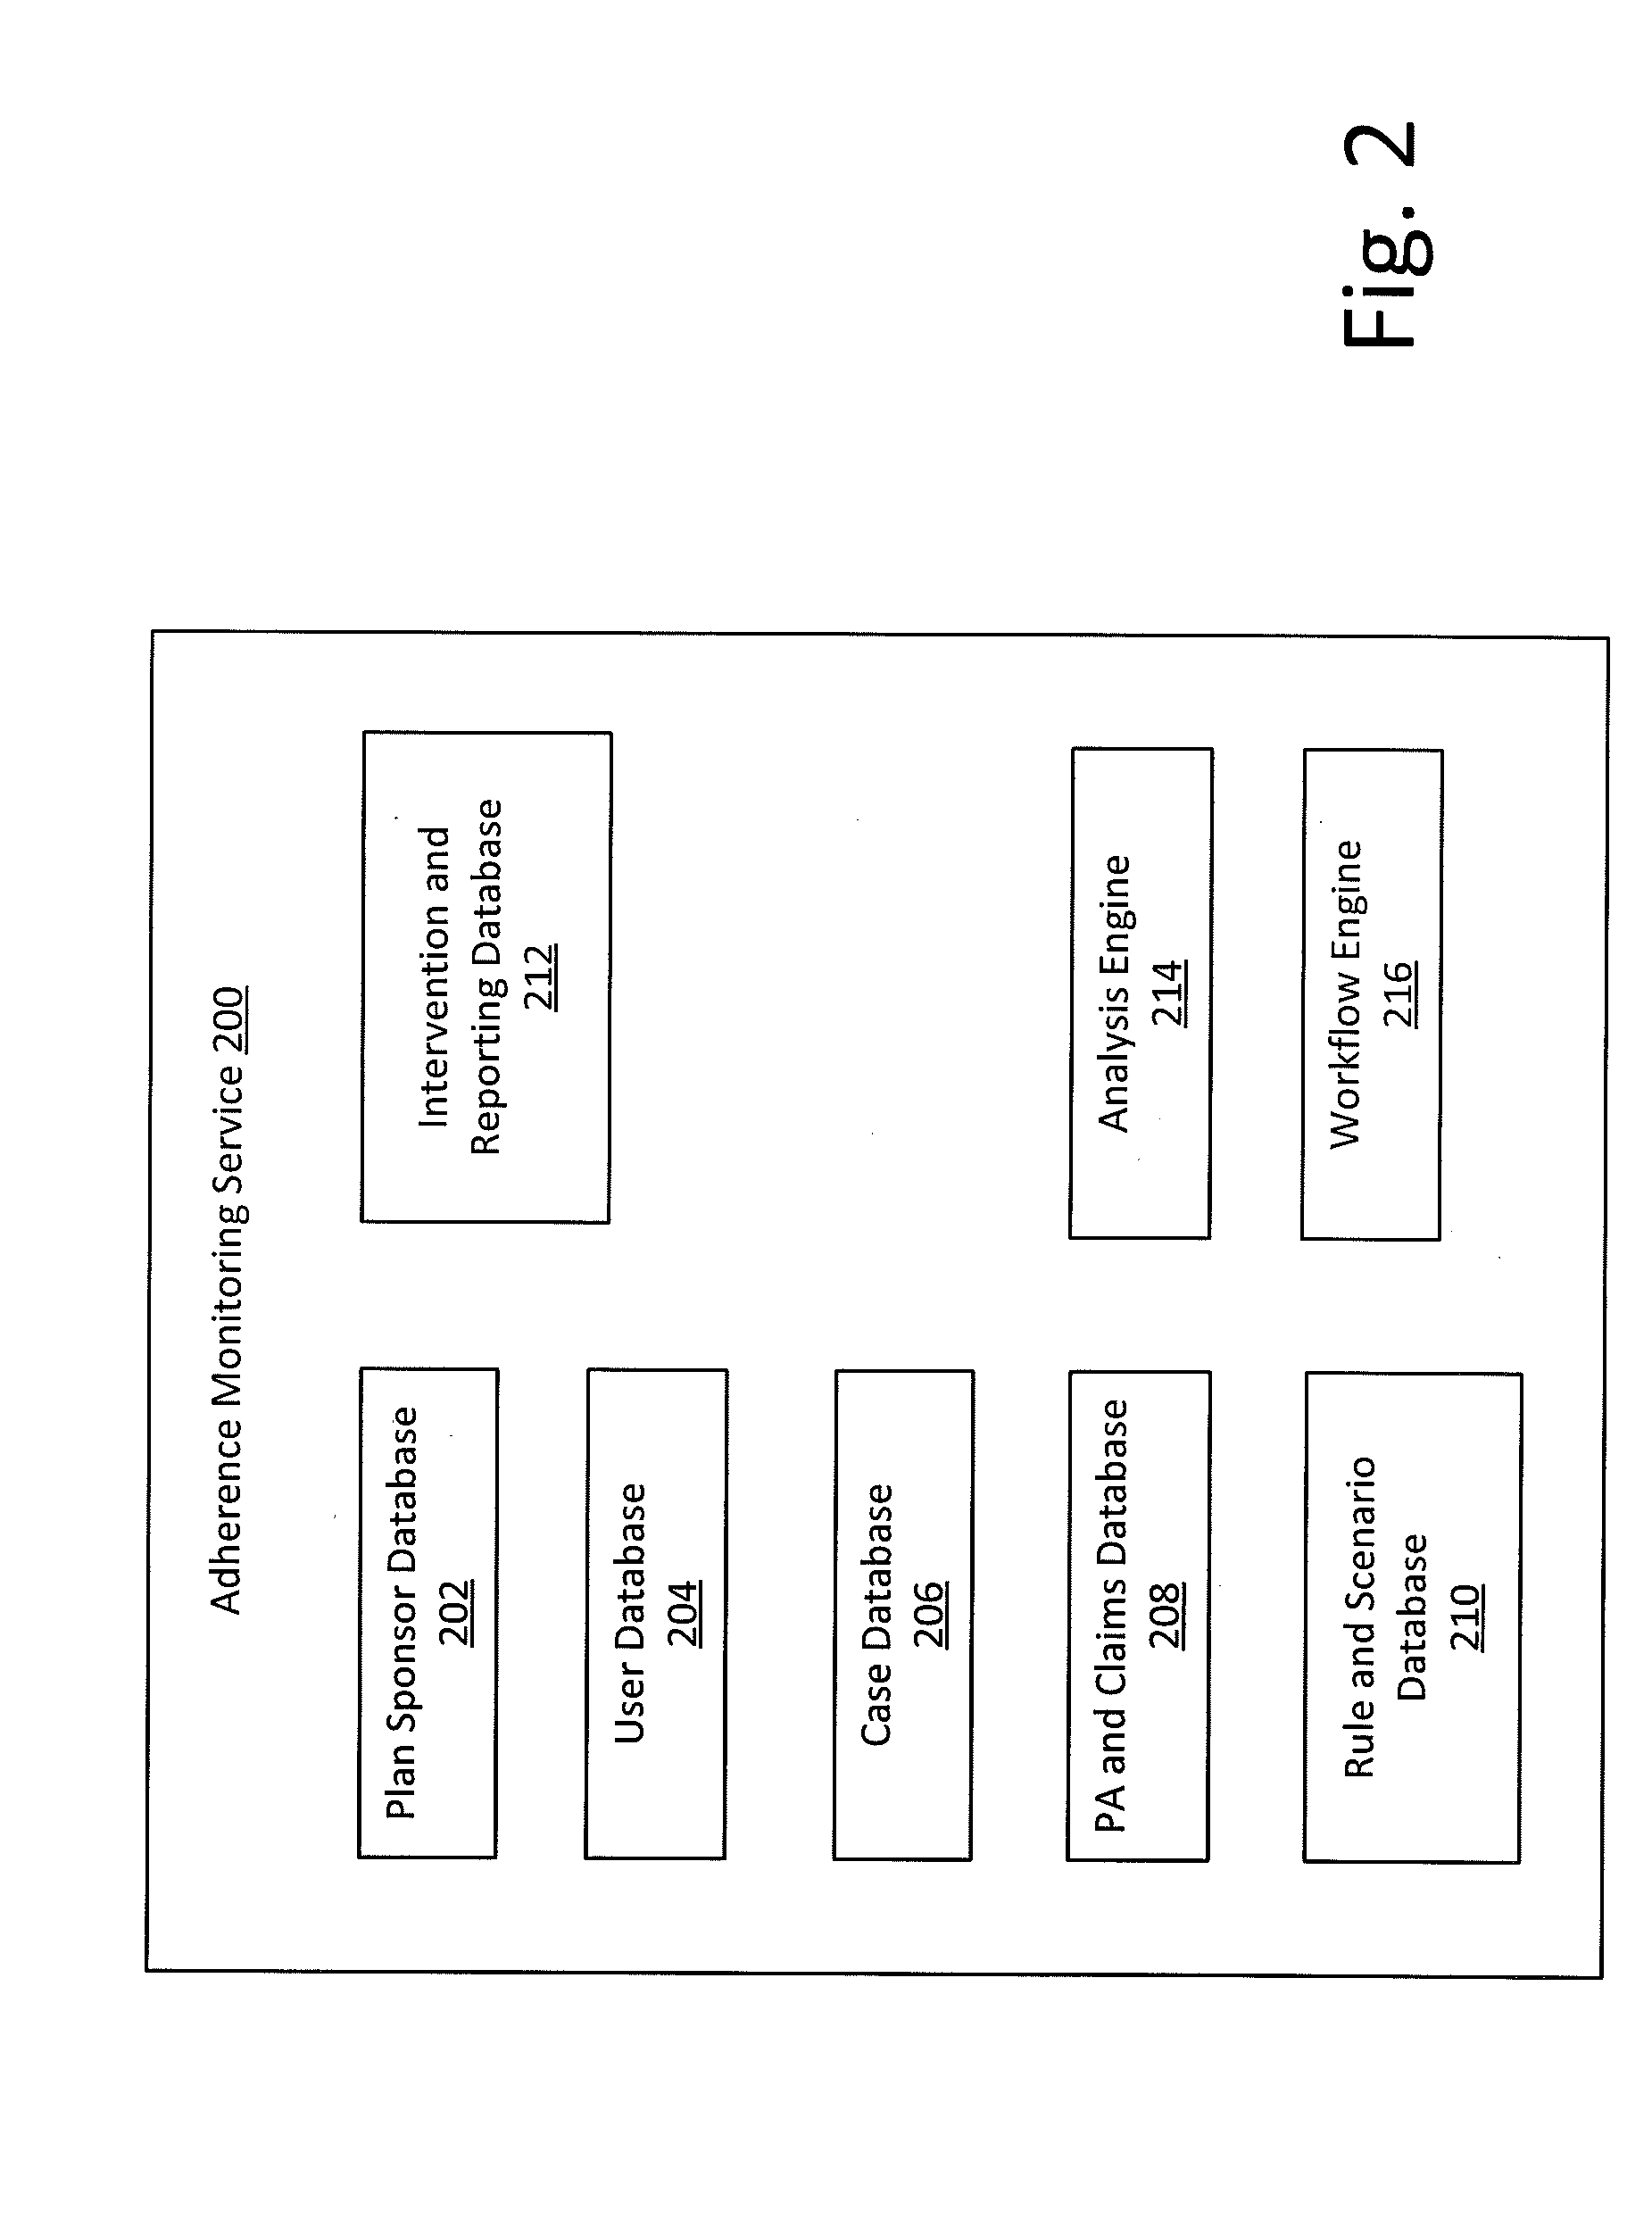 Method and system for monitoring medication adherence